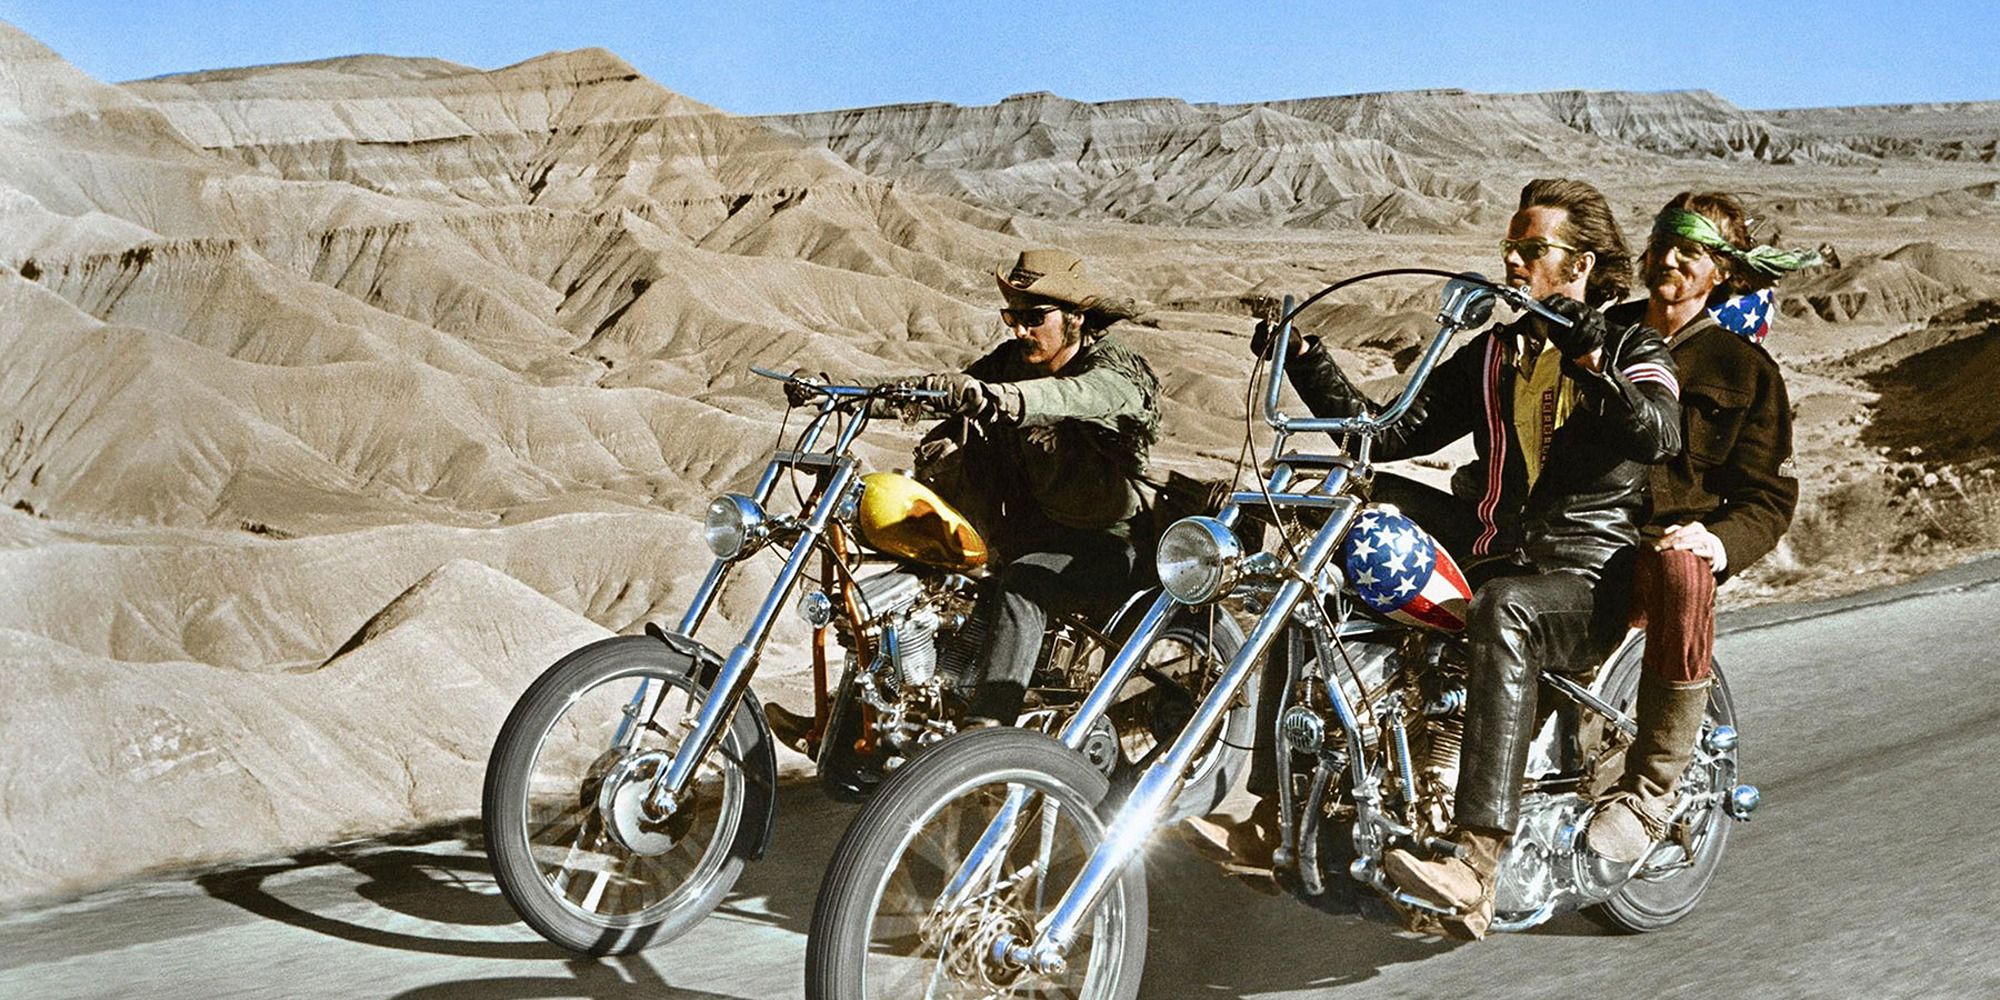 Men riding a motorcycle from Easy Rider in the southern United States